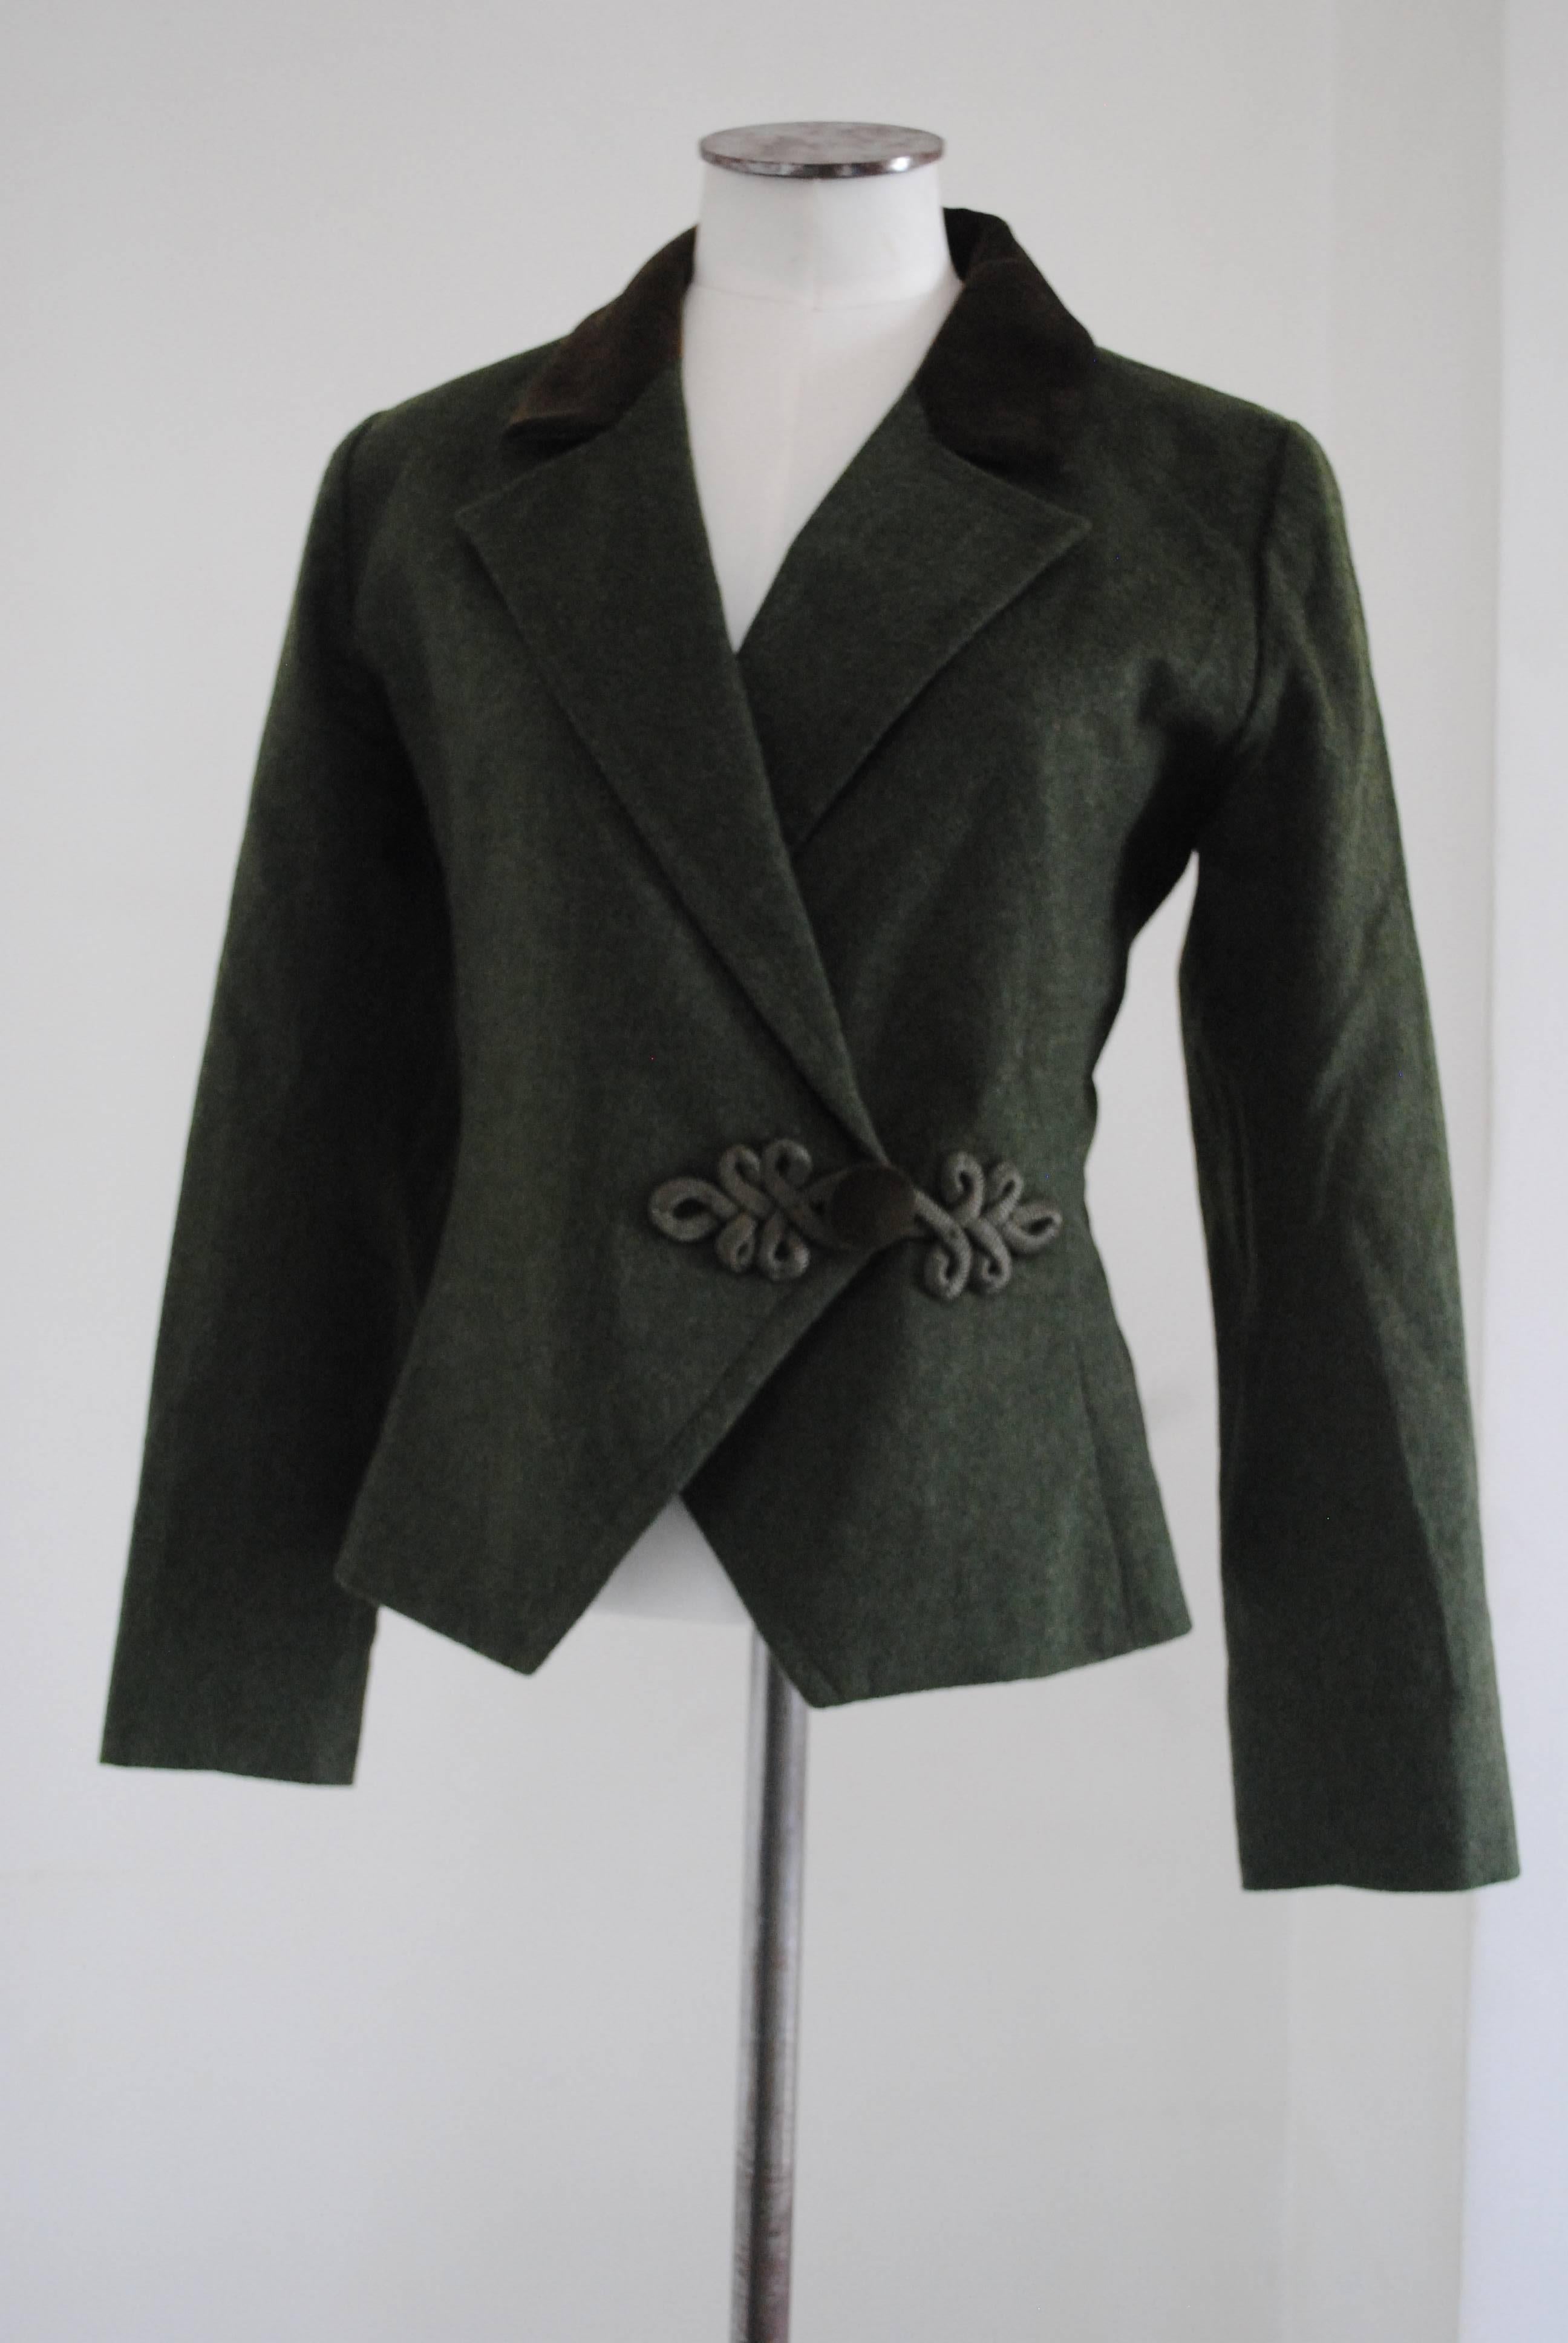 Yves Saint Laurent Variation Green Jacket

Green jacket with brown velvet neck

totally made in italy in size M

Composition: Wool and velvet